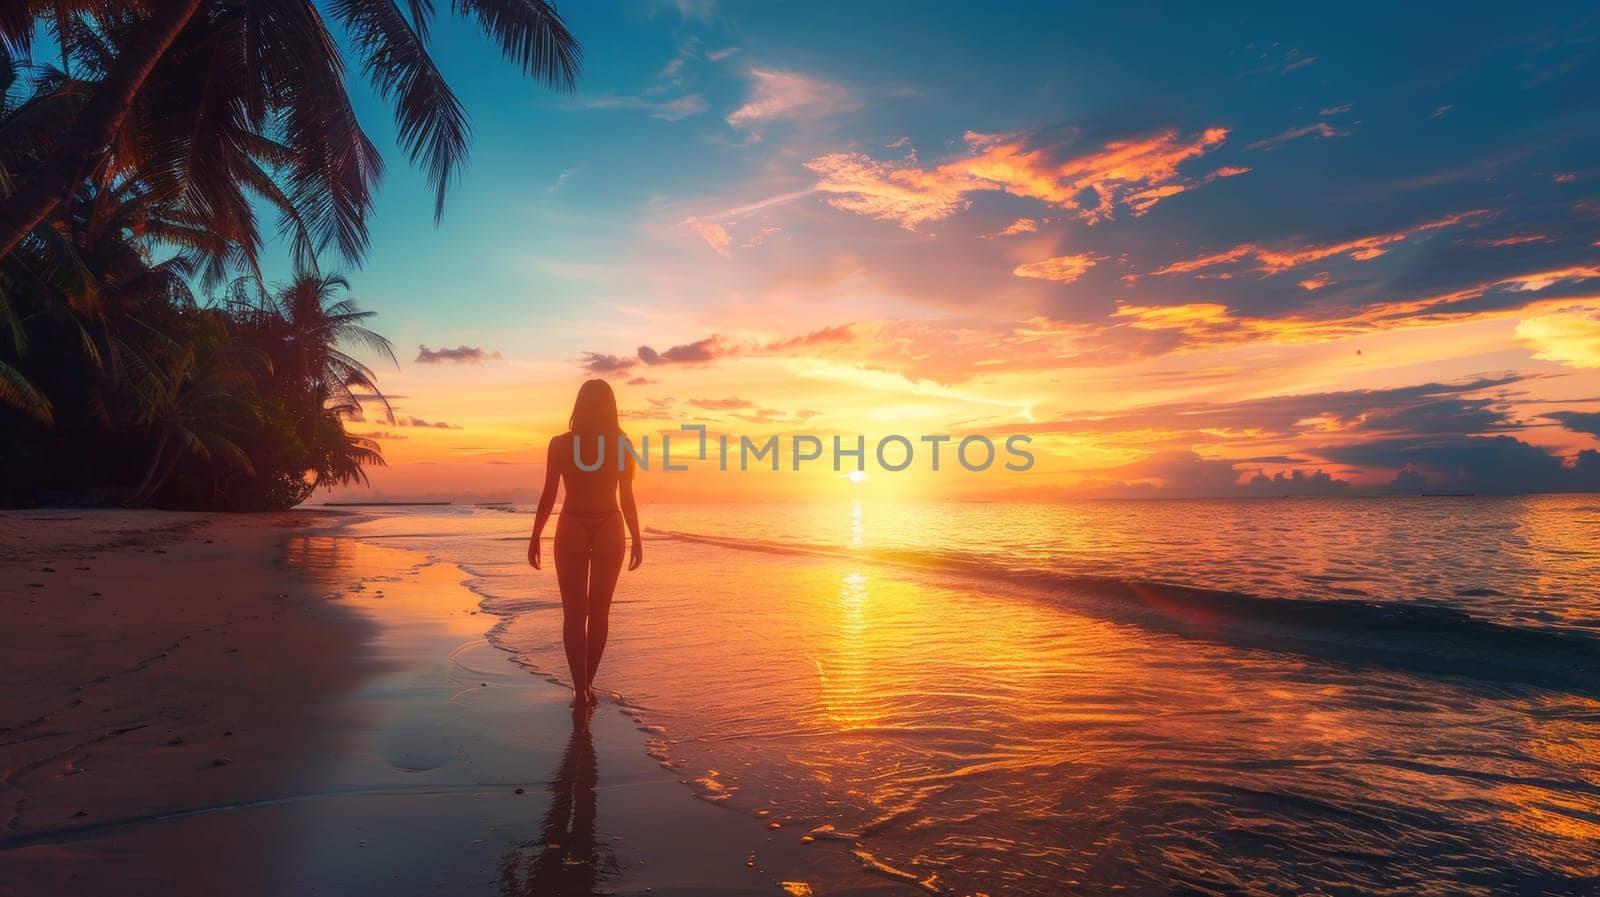 A woman walking on a beach at sunset with the ocean in front of her